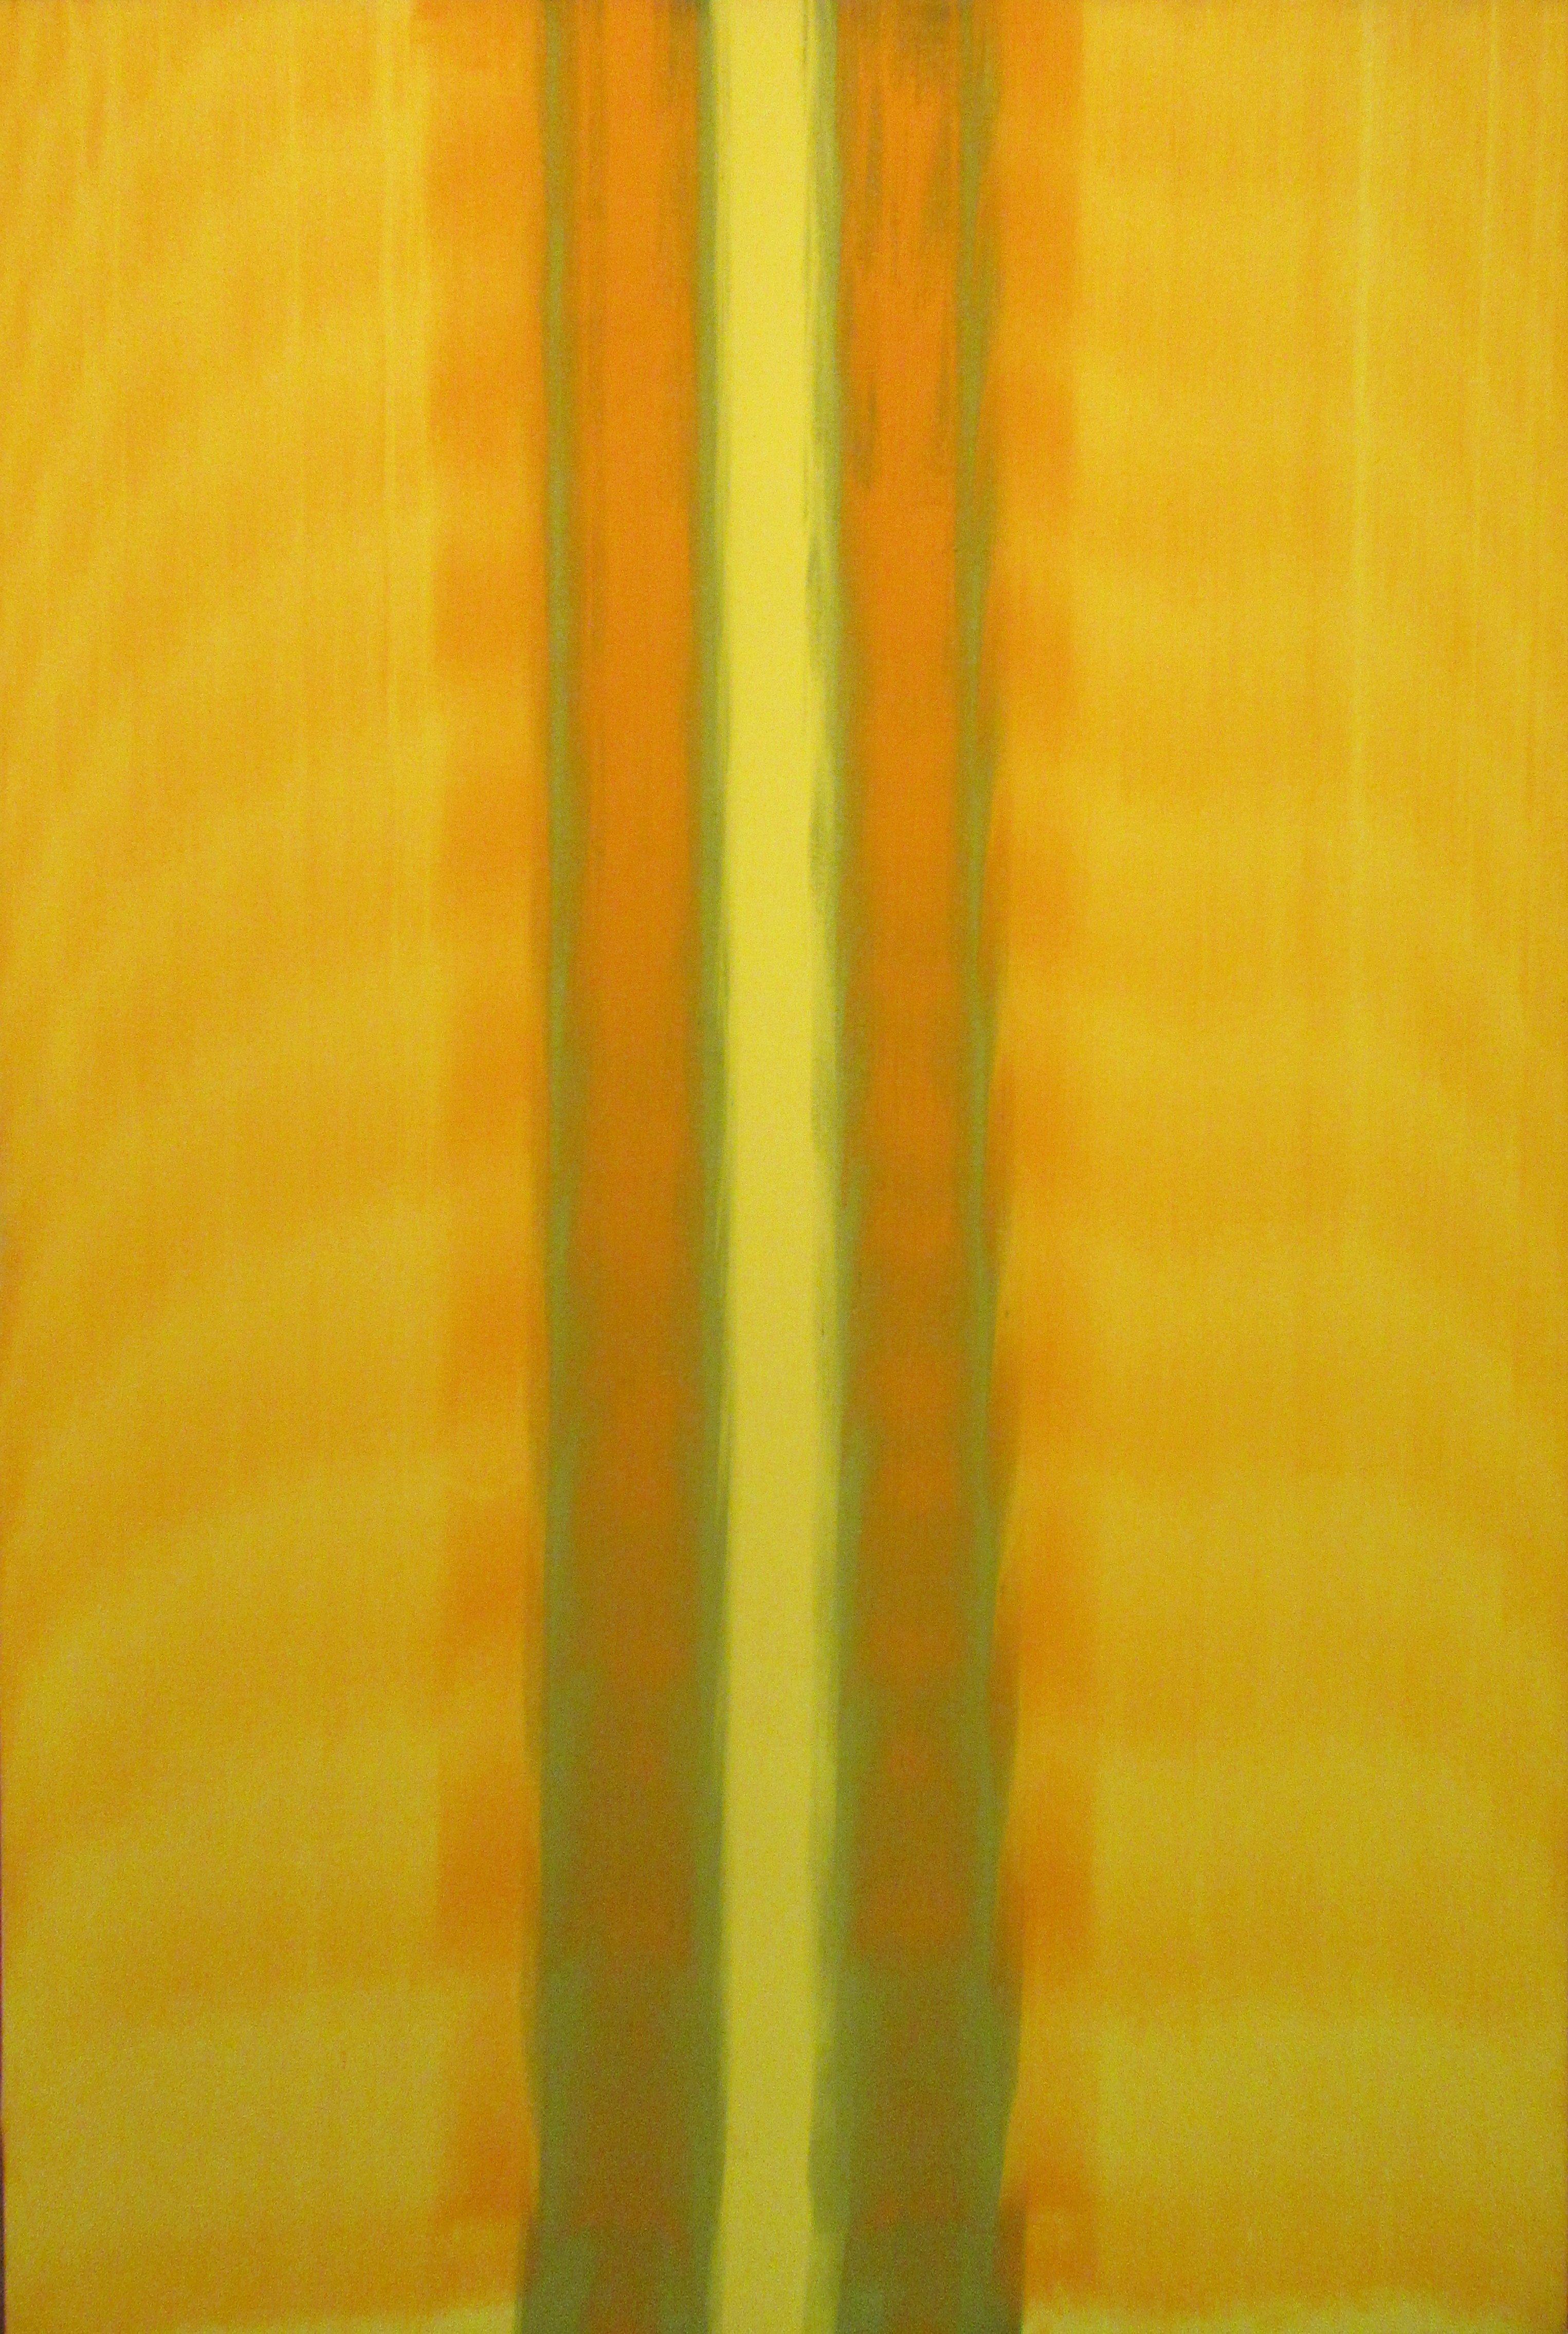 Gene Hedge
Untitled, circa 1966
Acrylic on canvas
61 1/2 x 42 1/8 inches
(P122)

Gene Hedge was born (1928) and raised in rural Indiana. After military service, he briefly attended Ball State University in Muncie, Indiana. There he encountered the